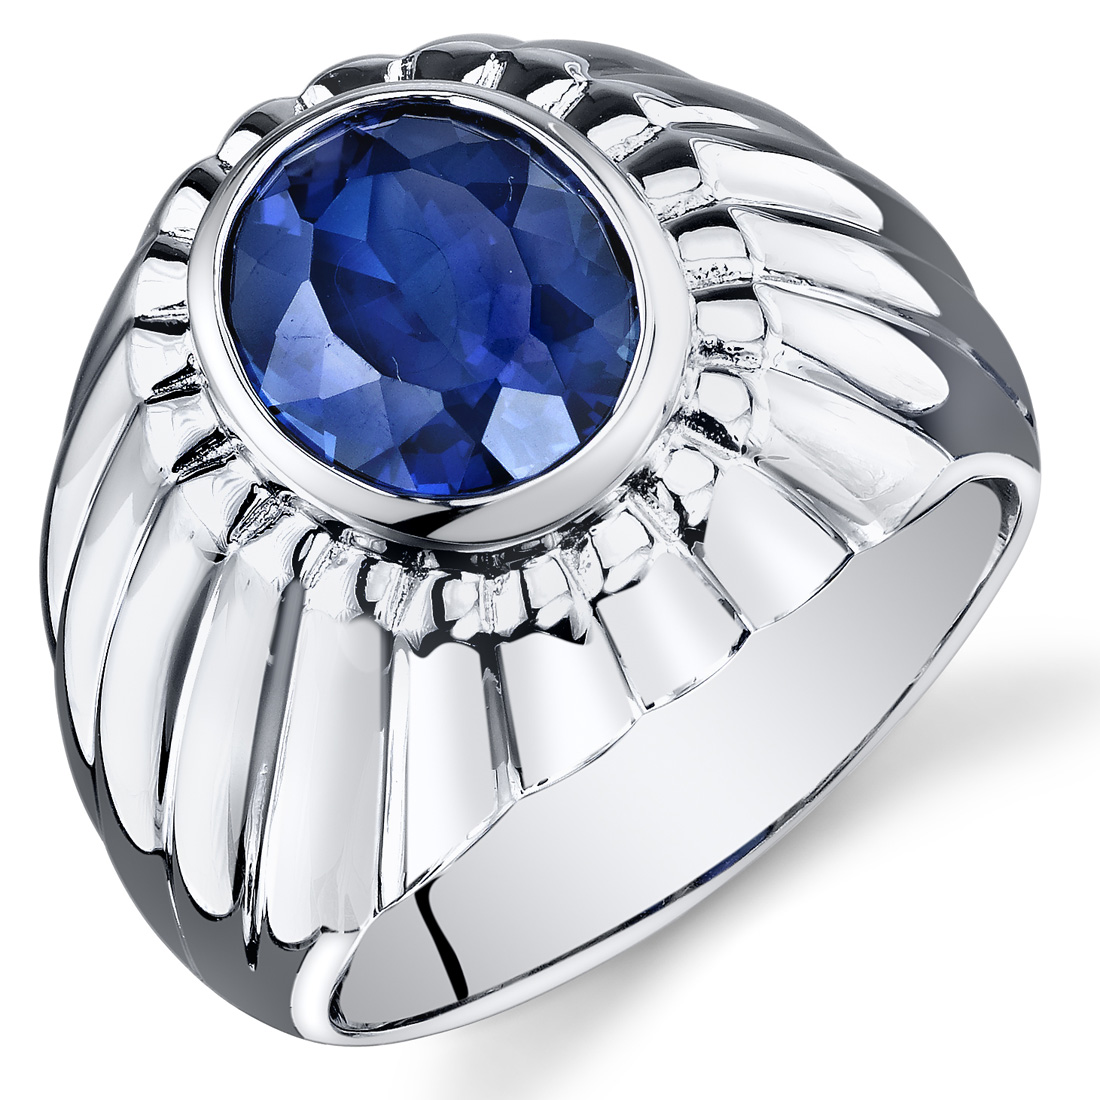 Mens 5.5 cts Round Cut Sapphire Sterling Silver Ring Sizes 8 To 13